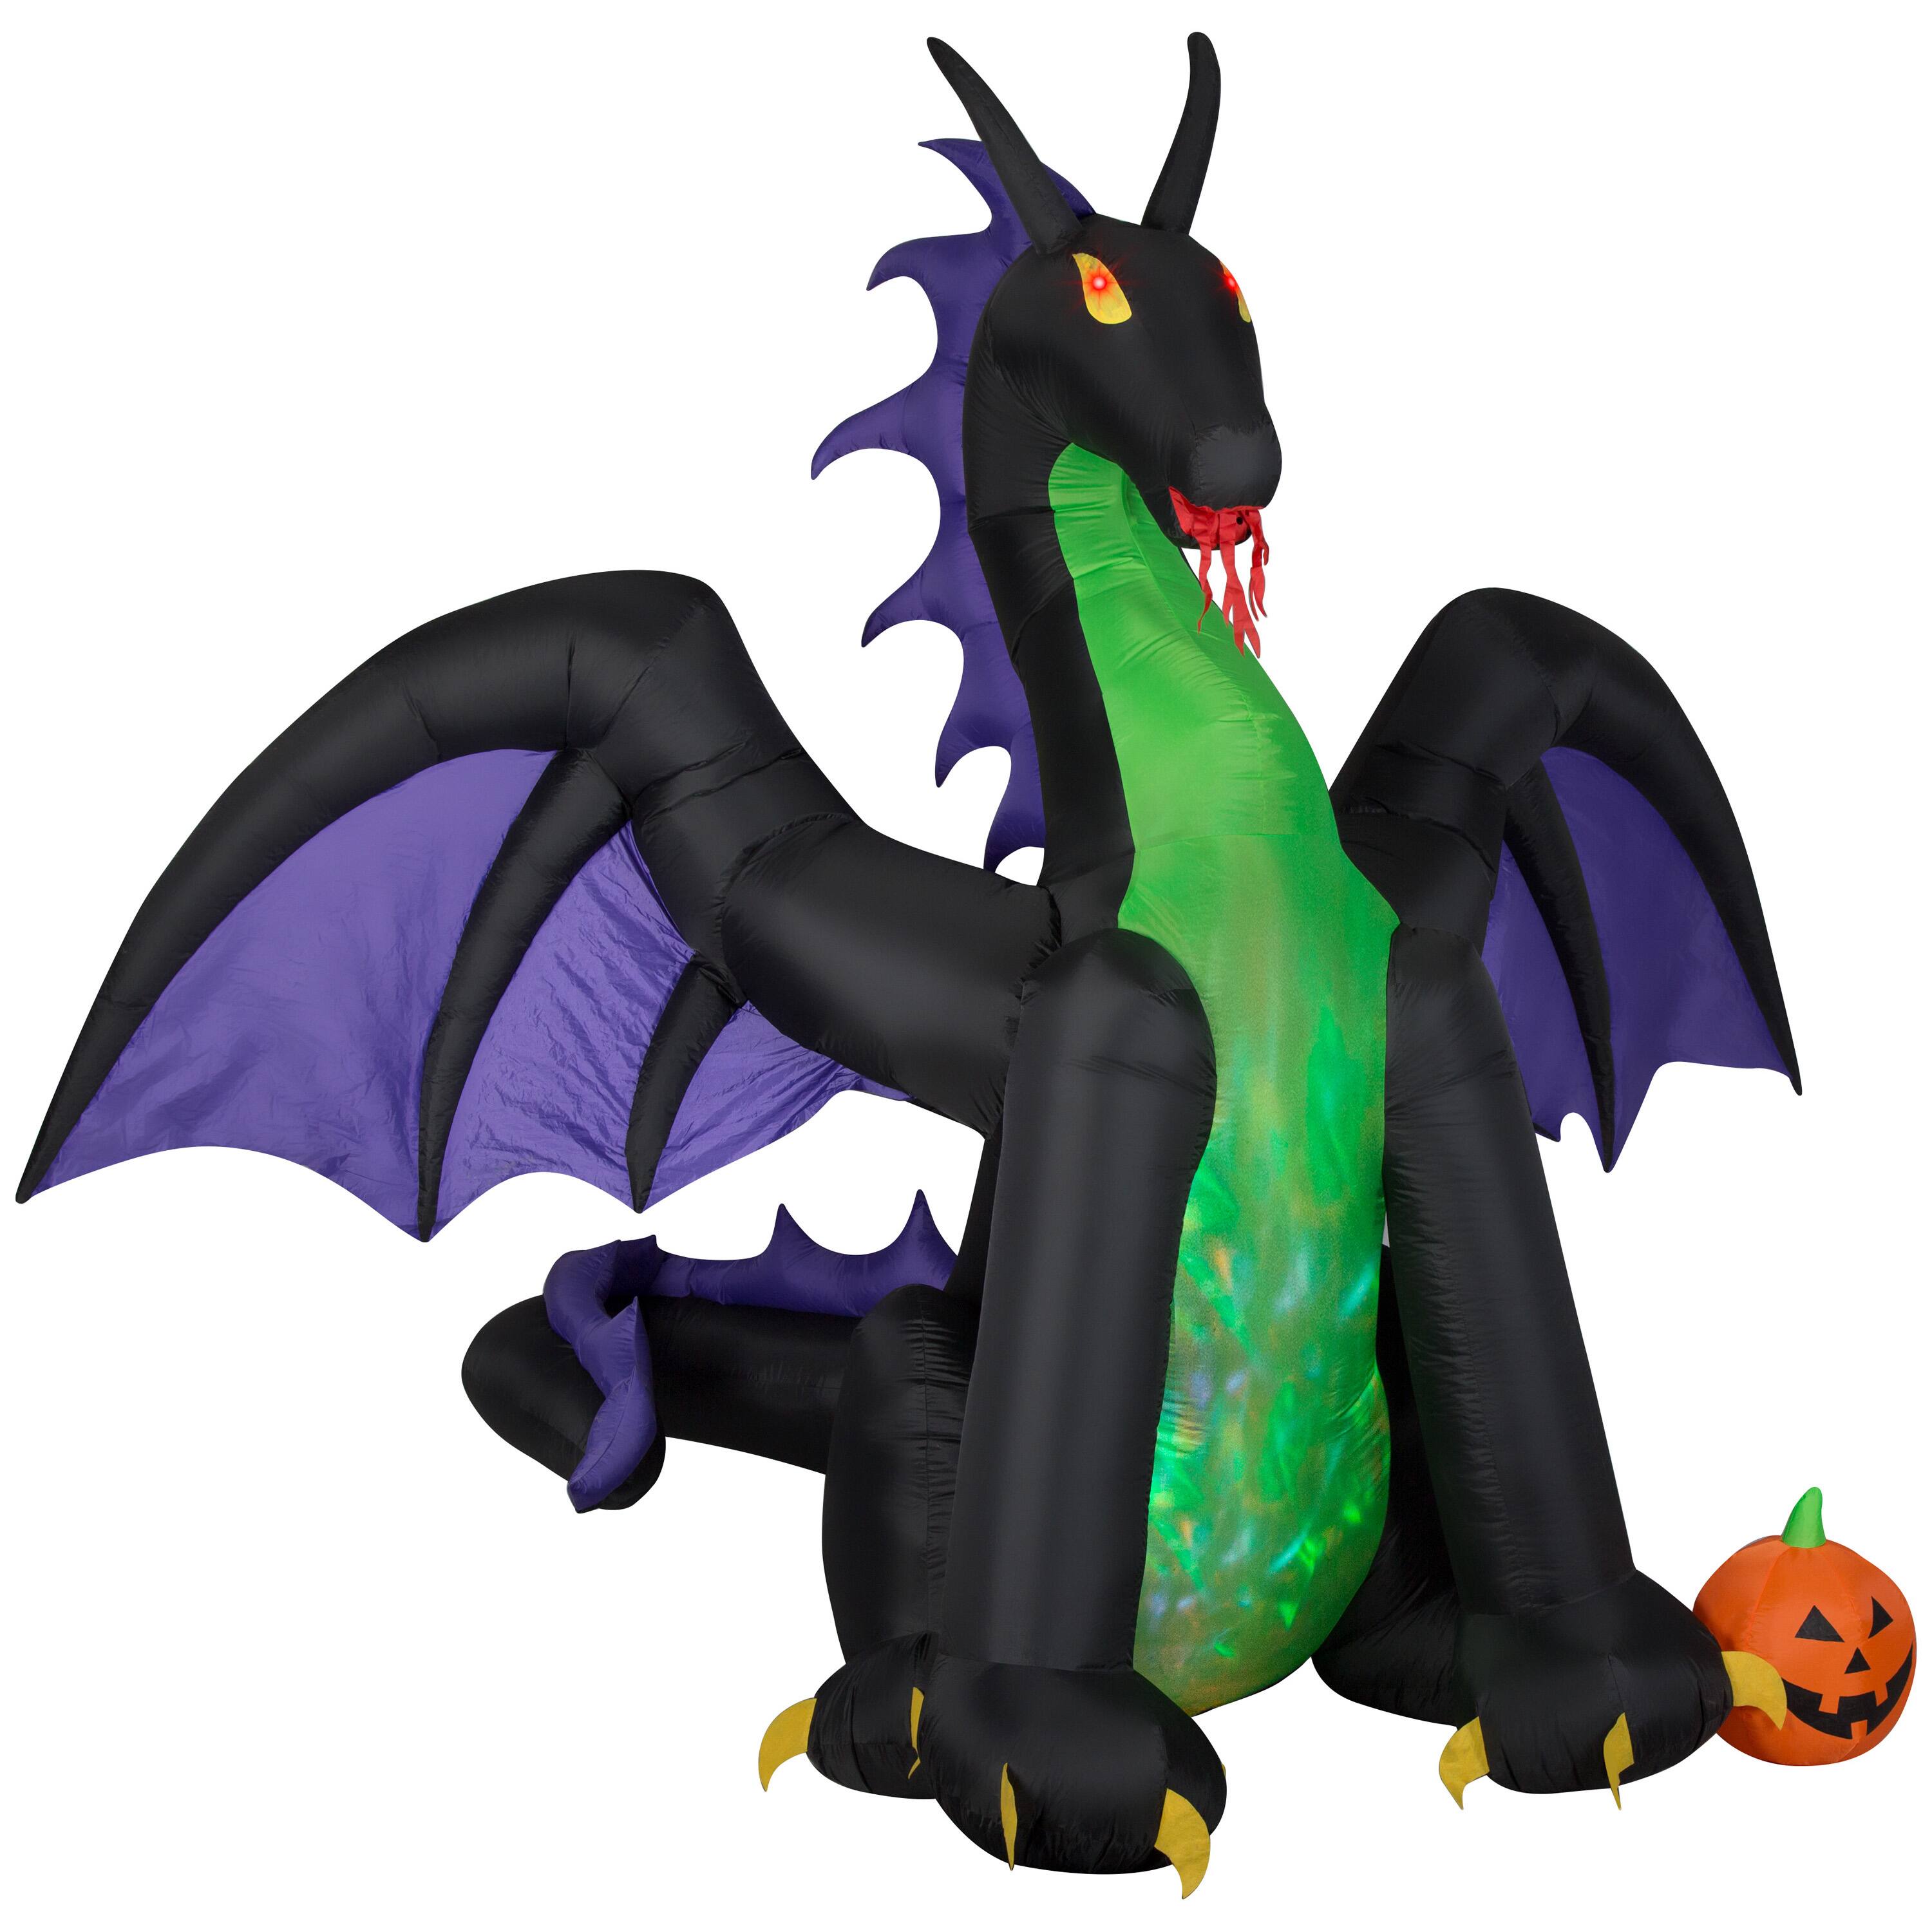 Halloween 9 ft Projection Inflatable Fire and Ice Dragon Animated Wings for sale online 